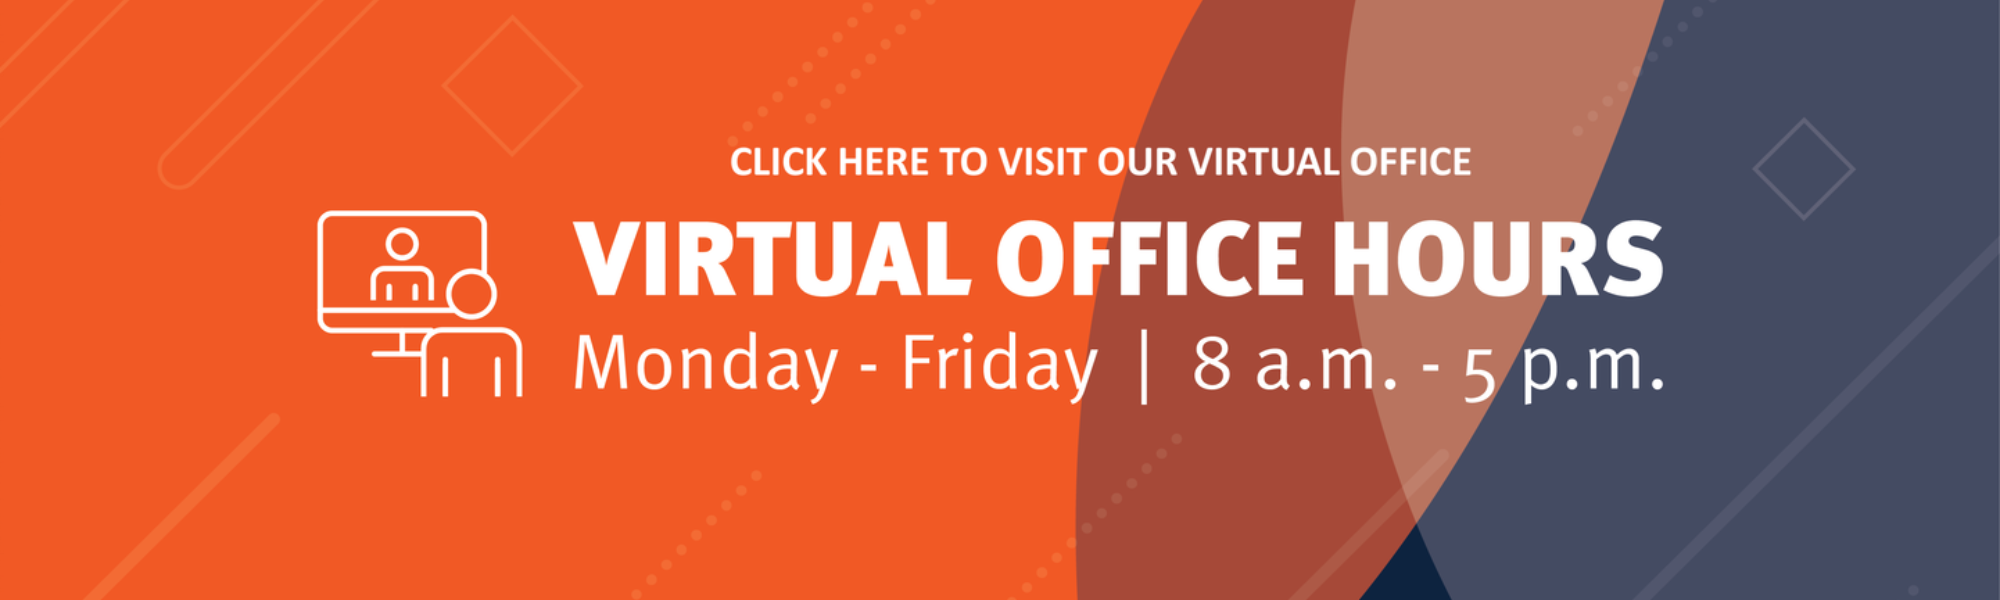 elc-virtual-office-hours-banner.png